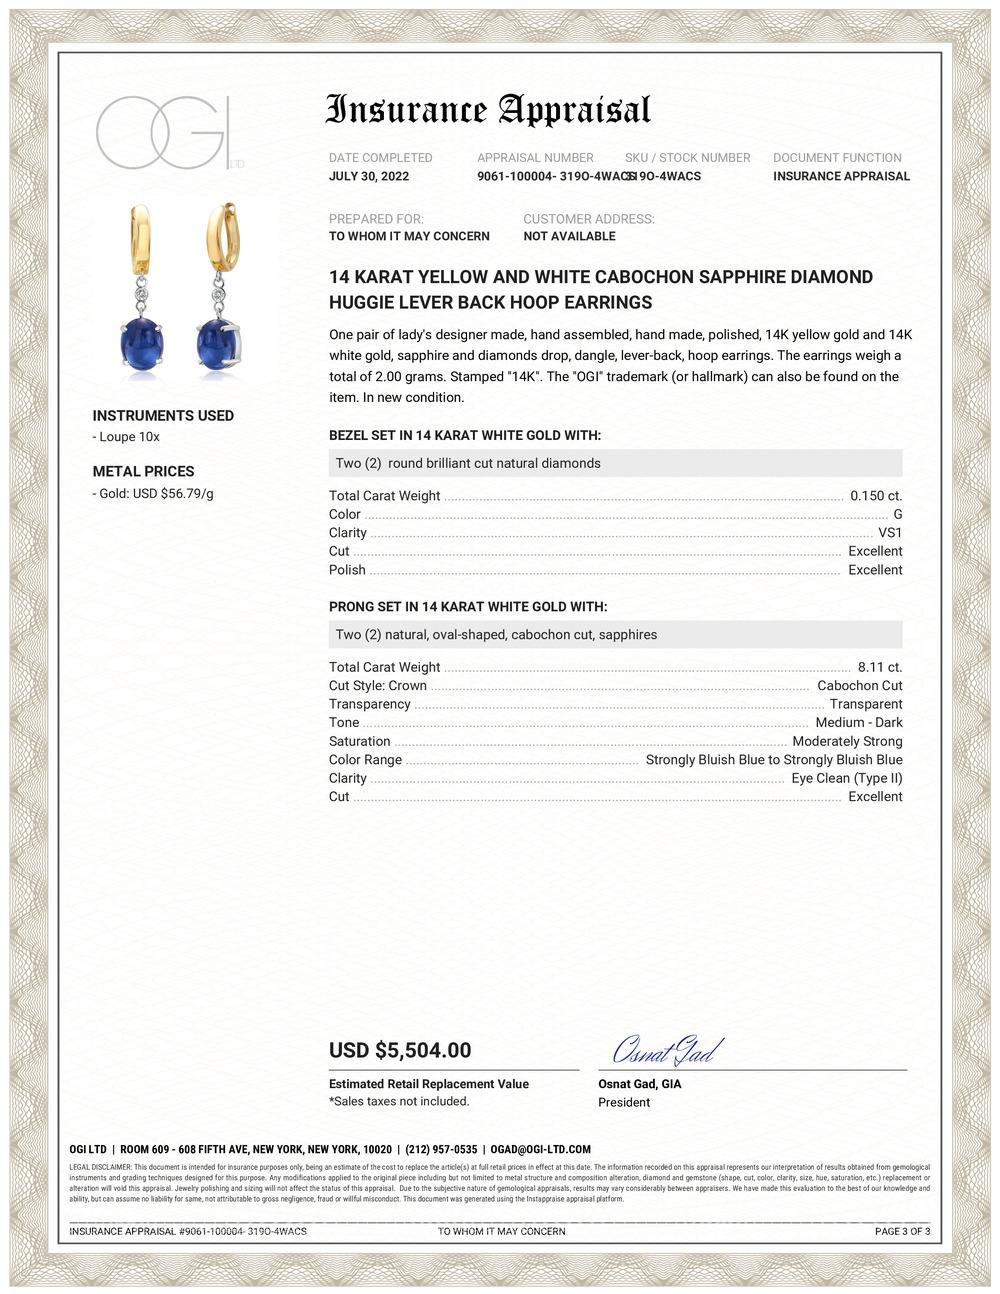 Fourteen karats yellow and white gold huggie lever back hoop earrings 
Two Ceylon oval-shaped cabochon sapphires weighing 8.11 carat 
Two matched diamonds weighing 0.15 carat  
New Earrings 
14 karat yellow gold huggie lever back
Our design team